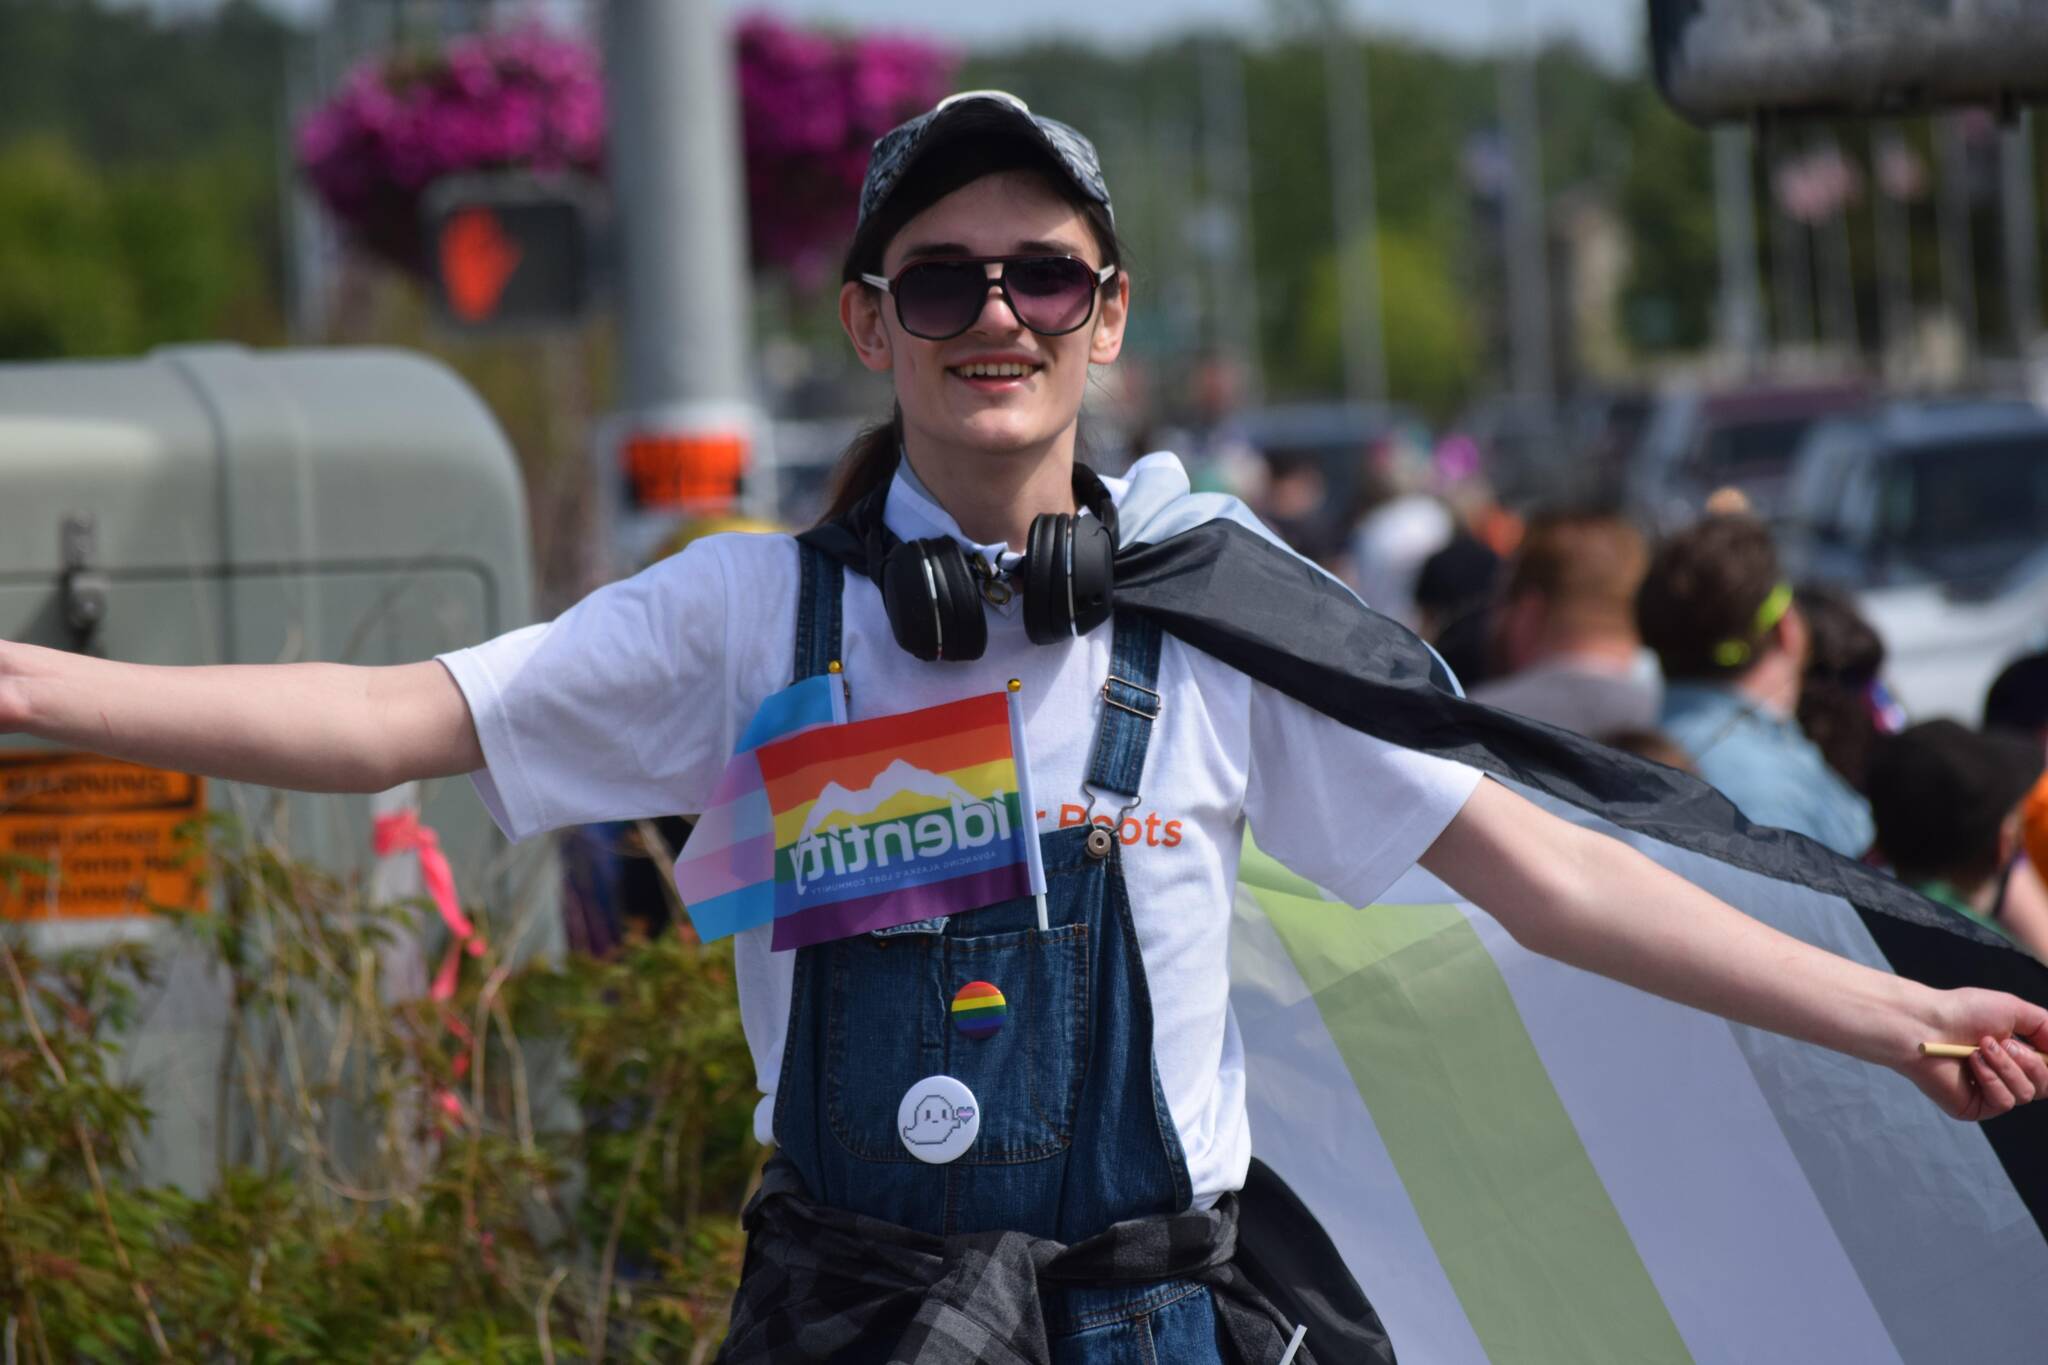 A group spanning the length of five blocks marches in downtown Soldotna, Alaska, to celebrate Pride Month on Saturday, June 12, 2021. (Camille Botello / Peninsula Clarion)